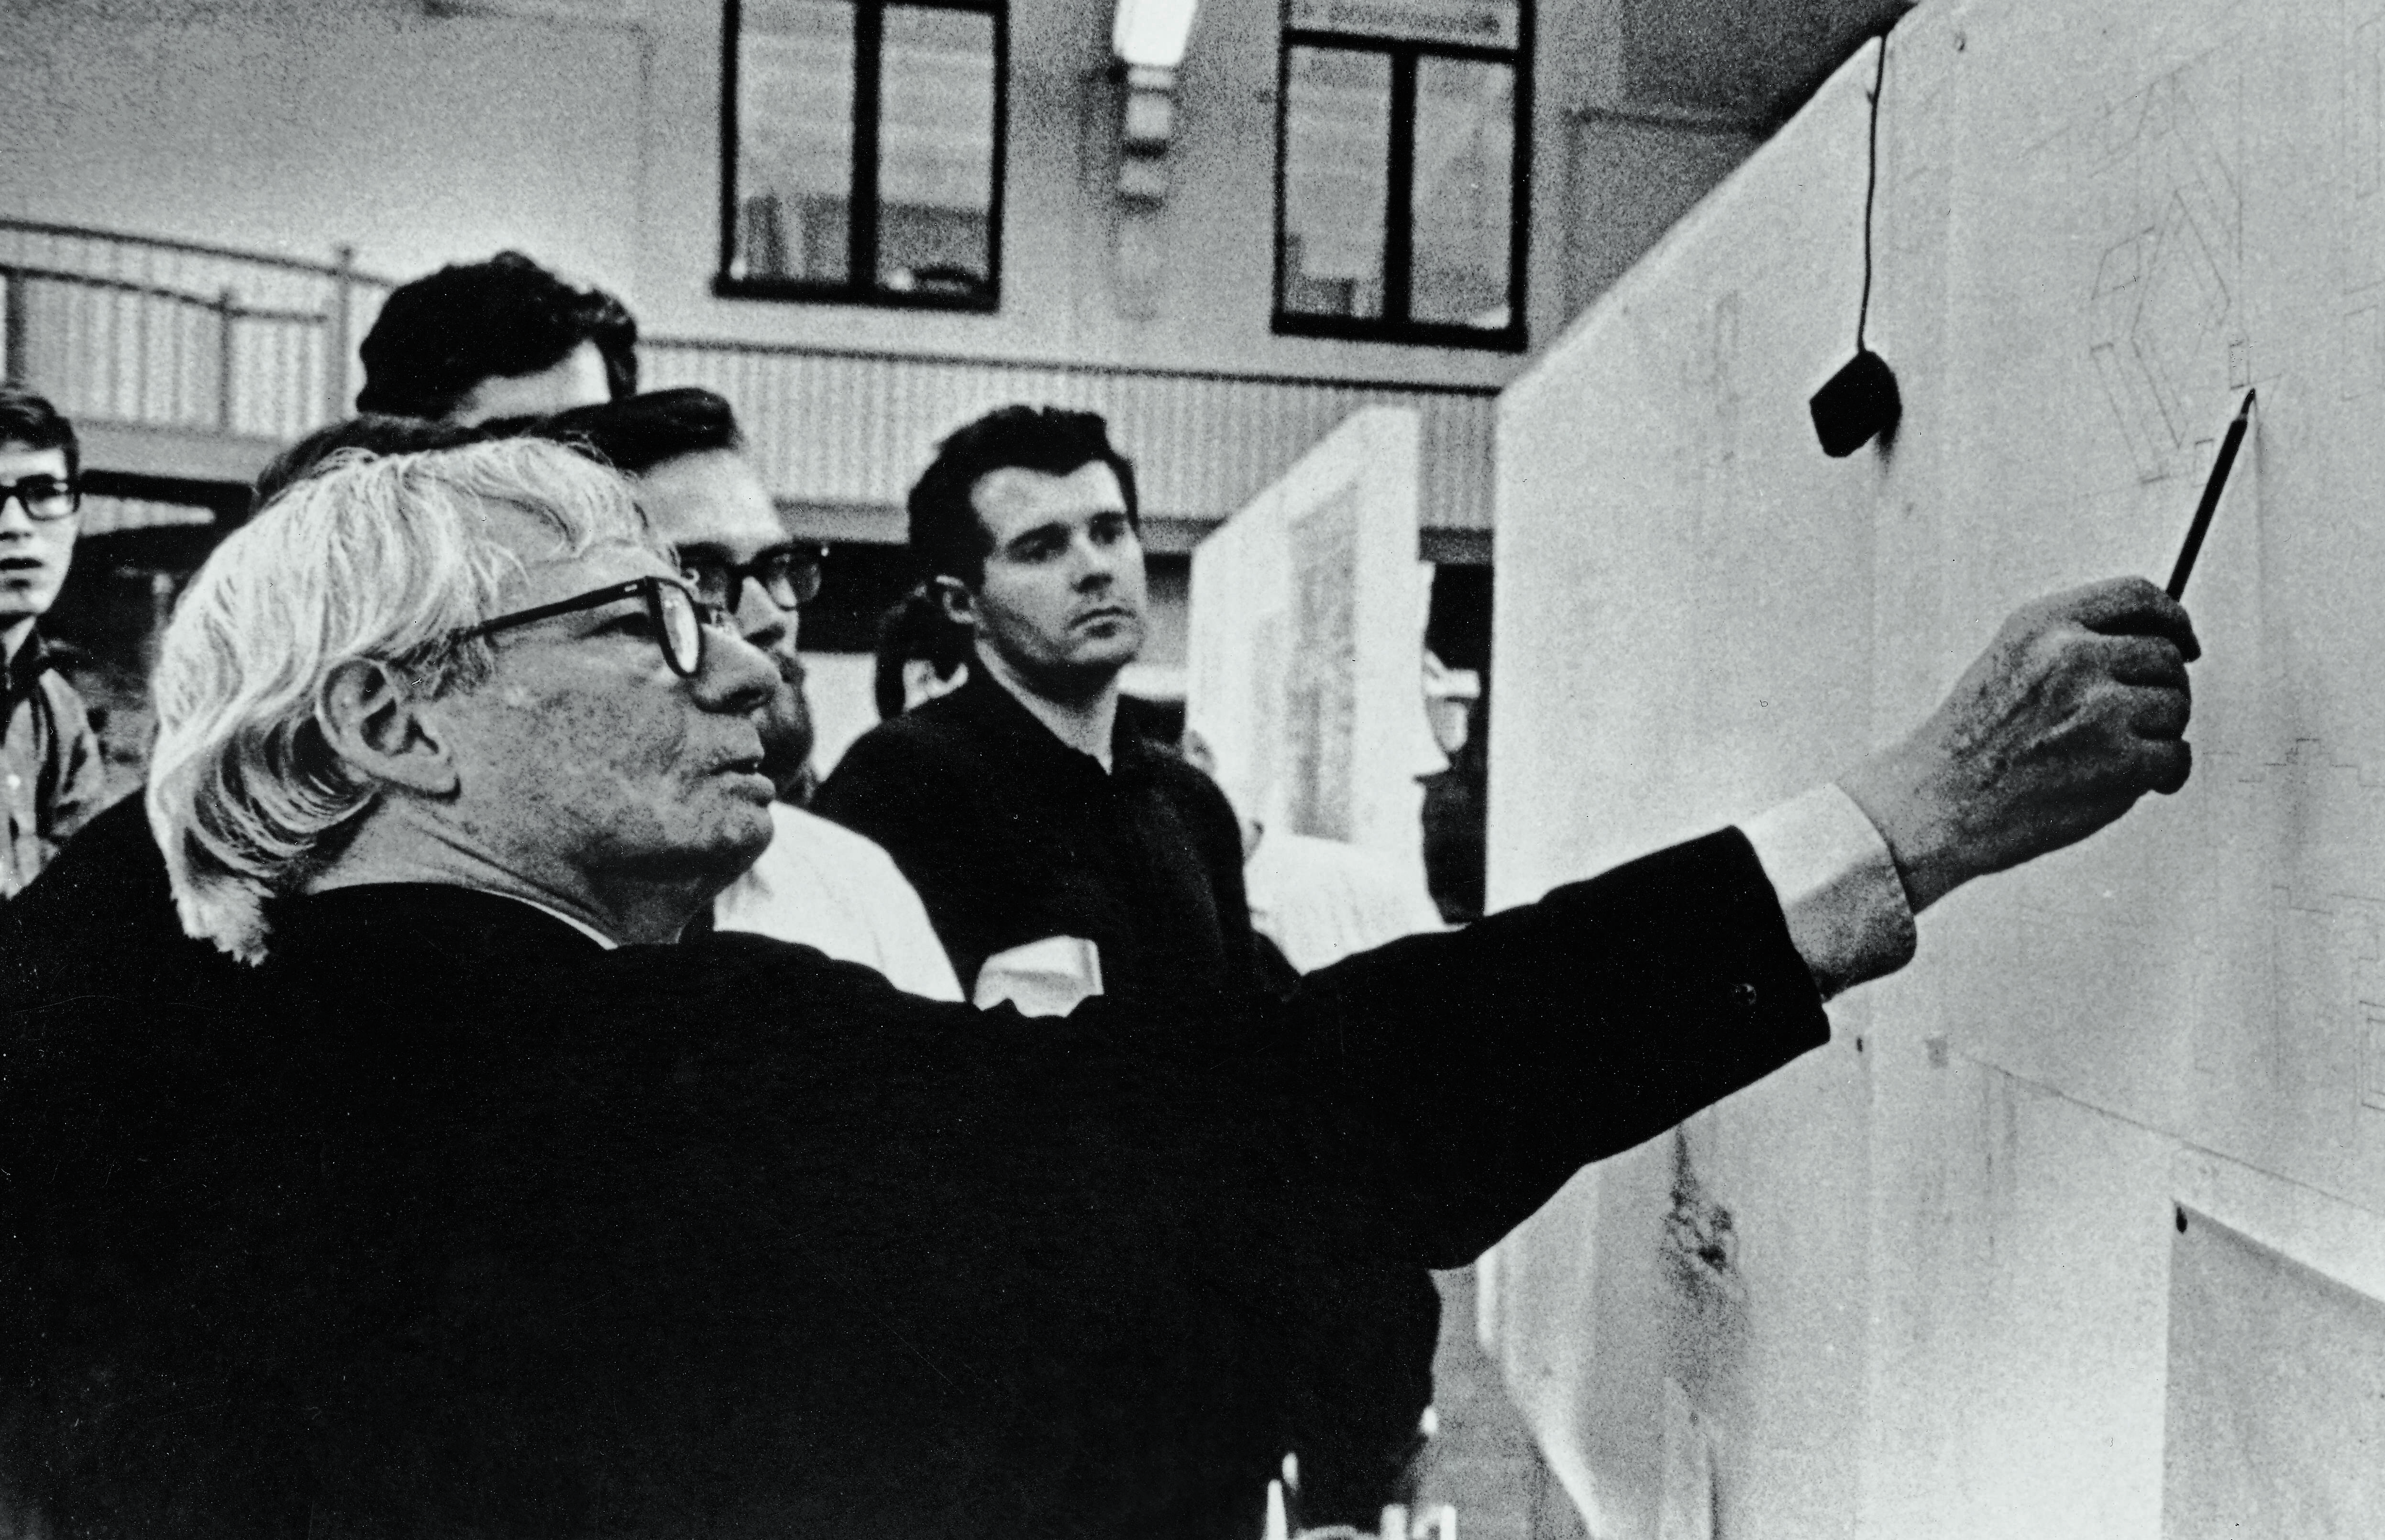 All you need to know about Louis I Kahn